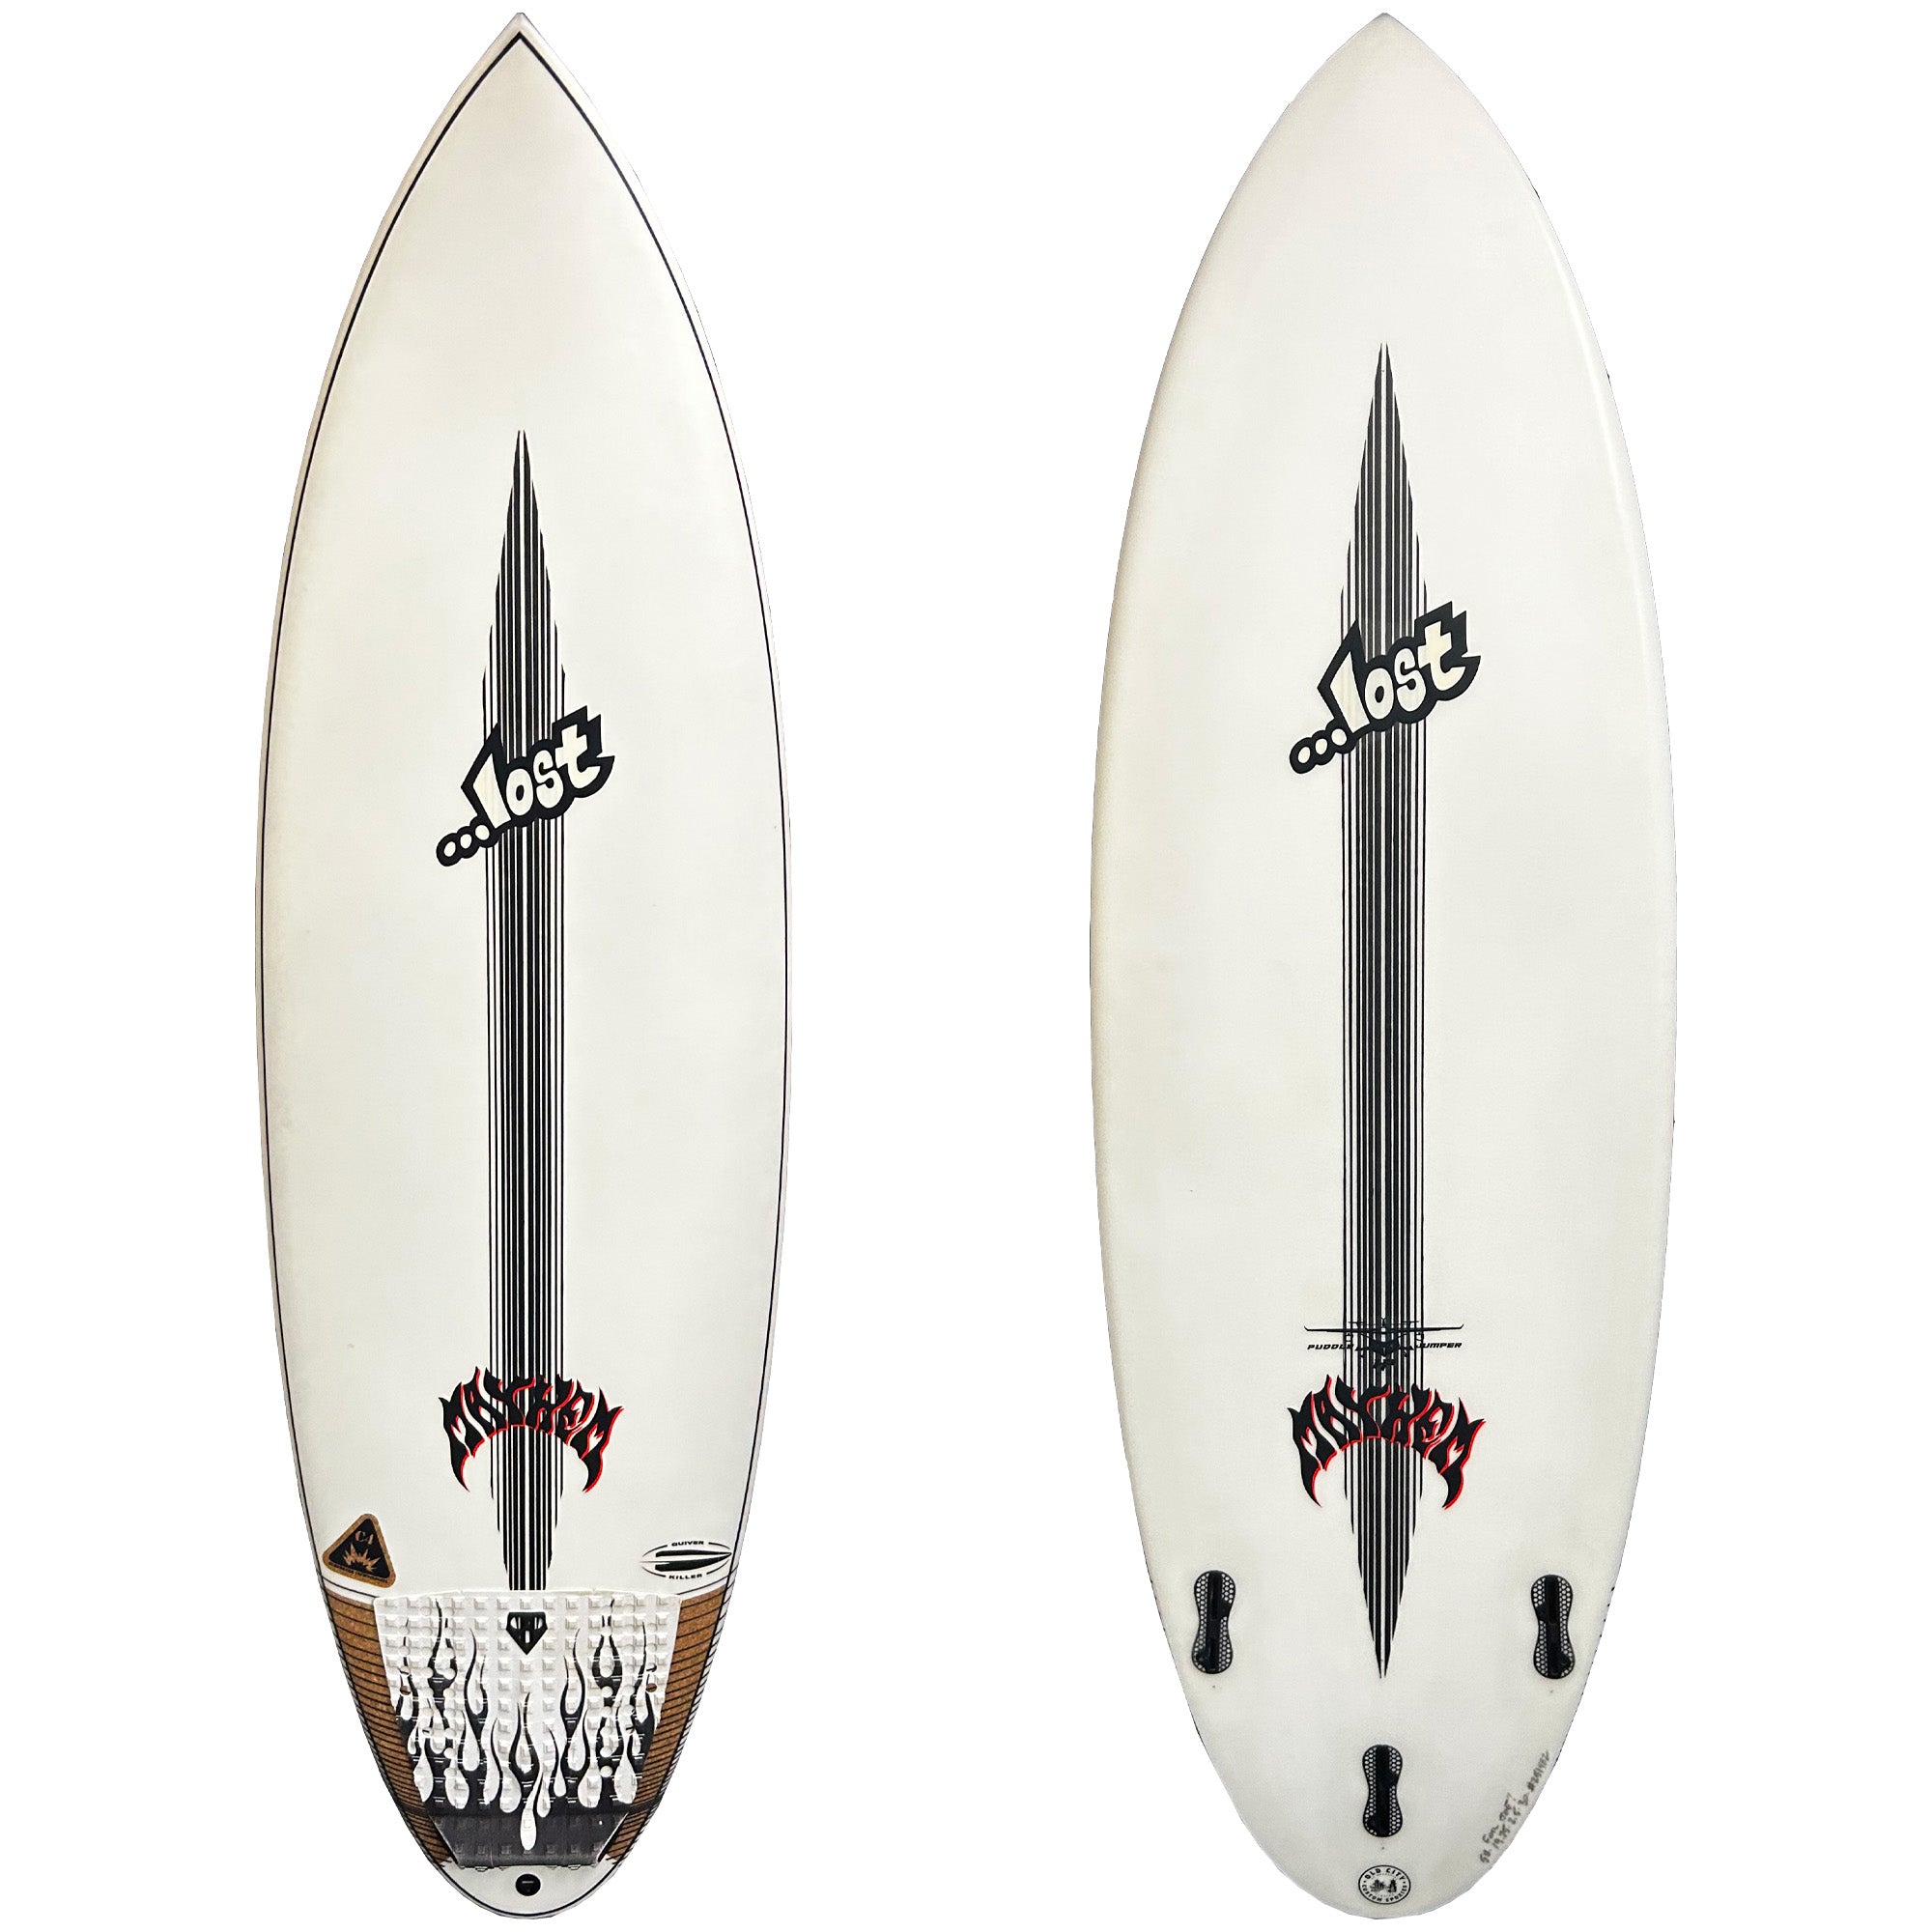 Lost Quiver Killer 5'8 Used Surfboard